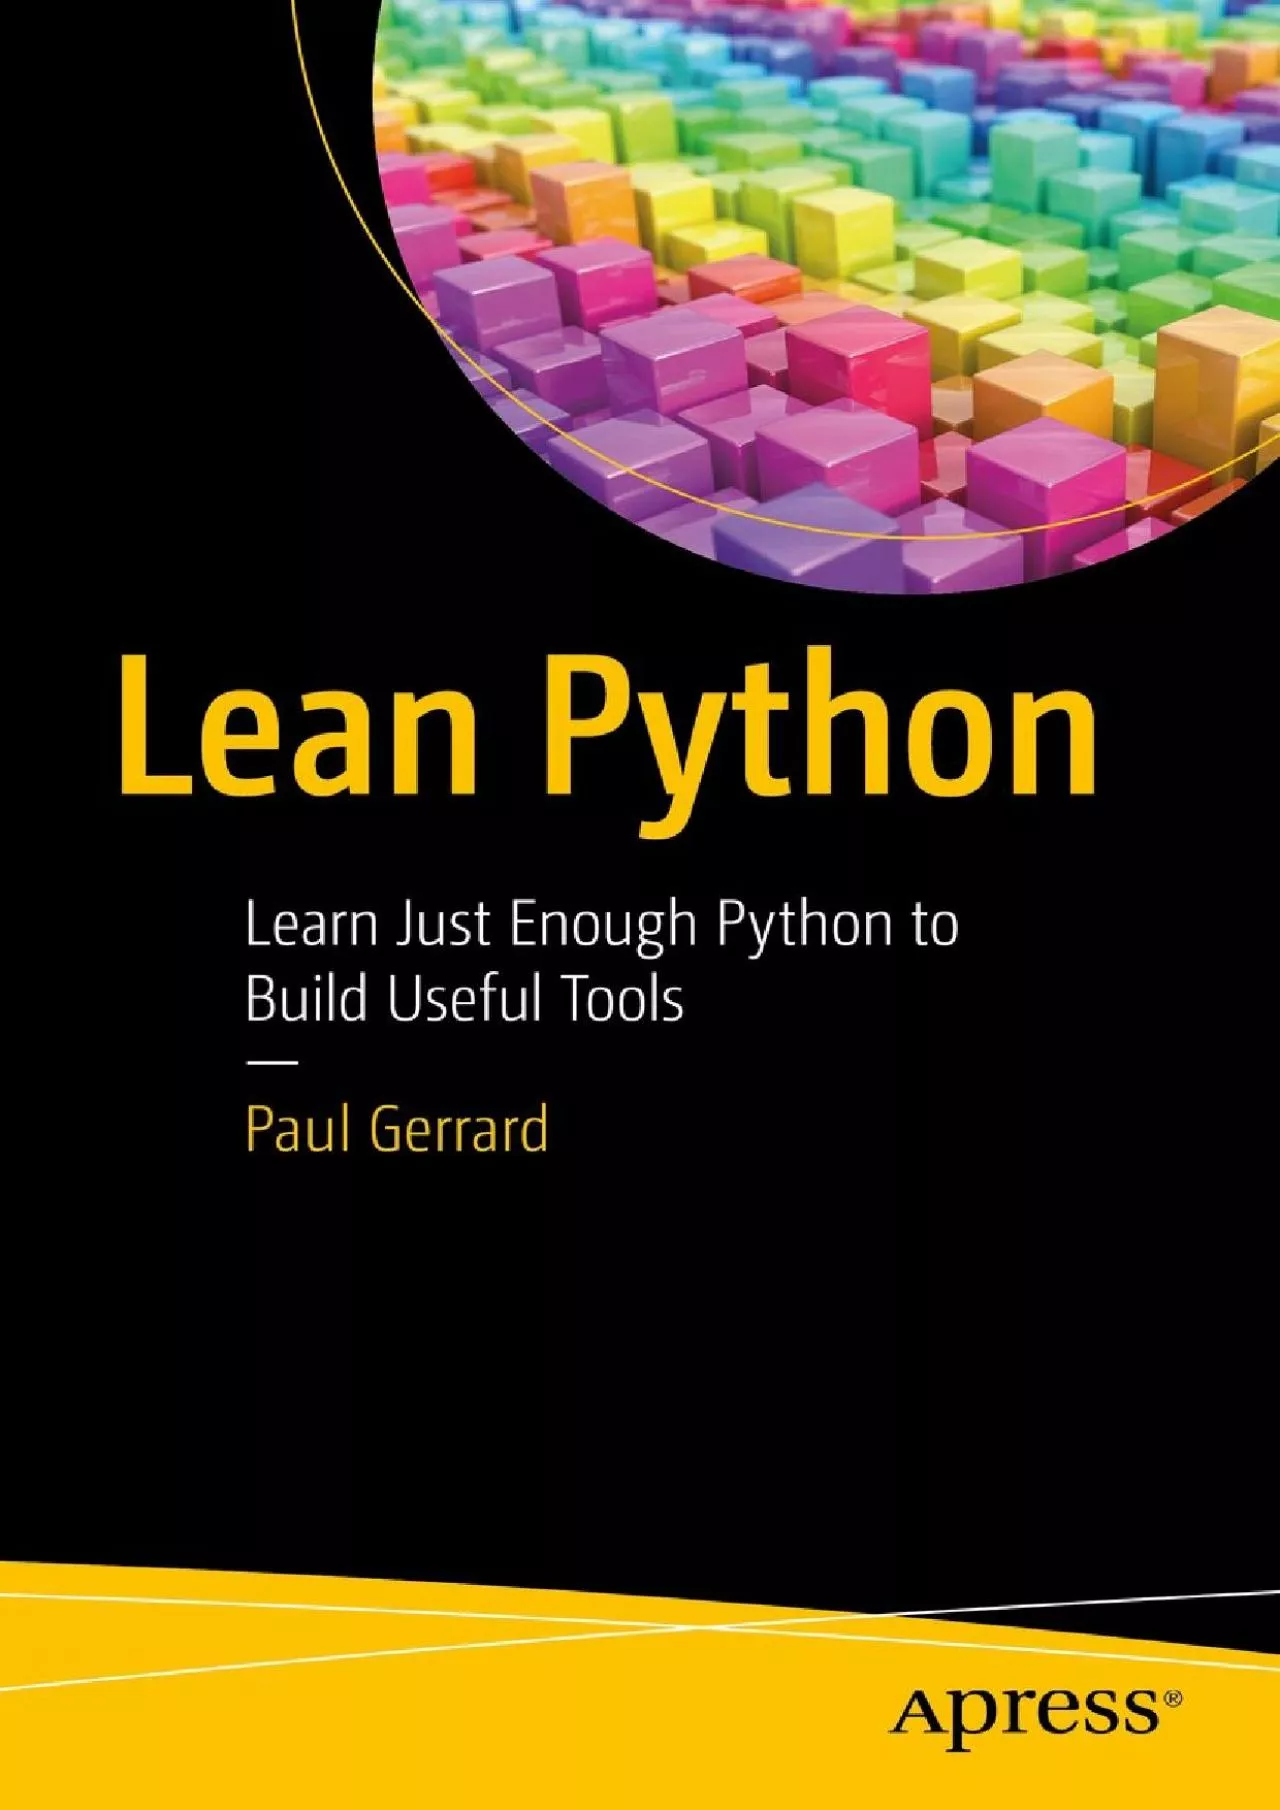 [FREE]-Lean Python: Learn Just Enough Python to Build Useful Tools